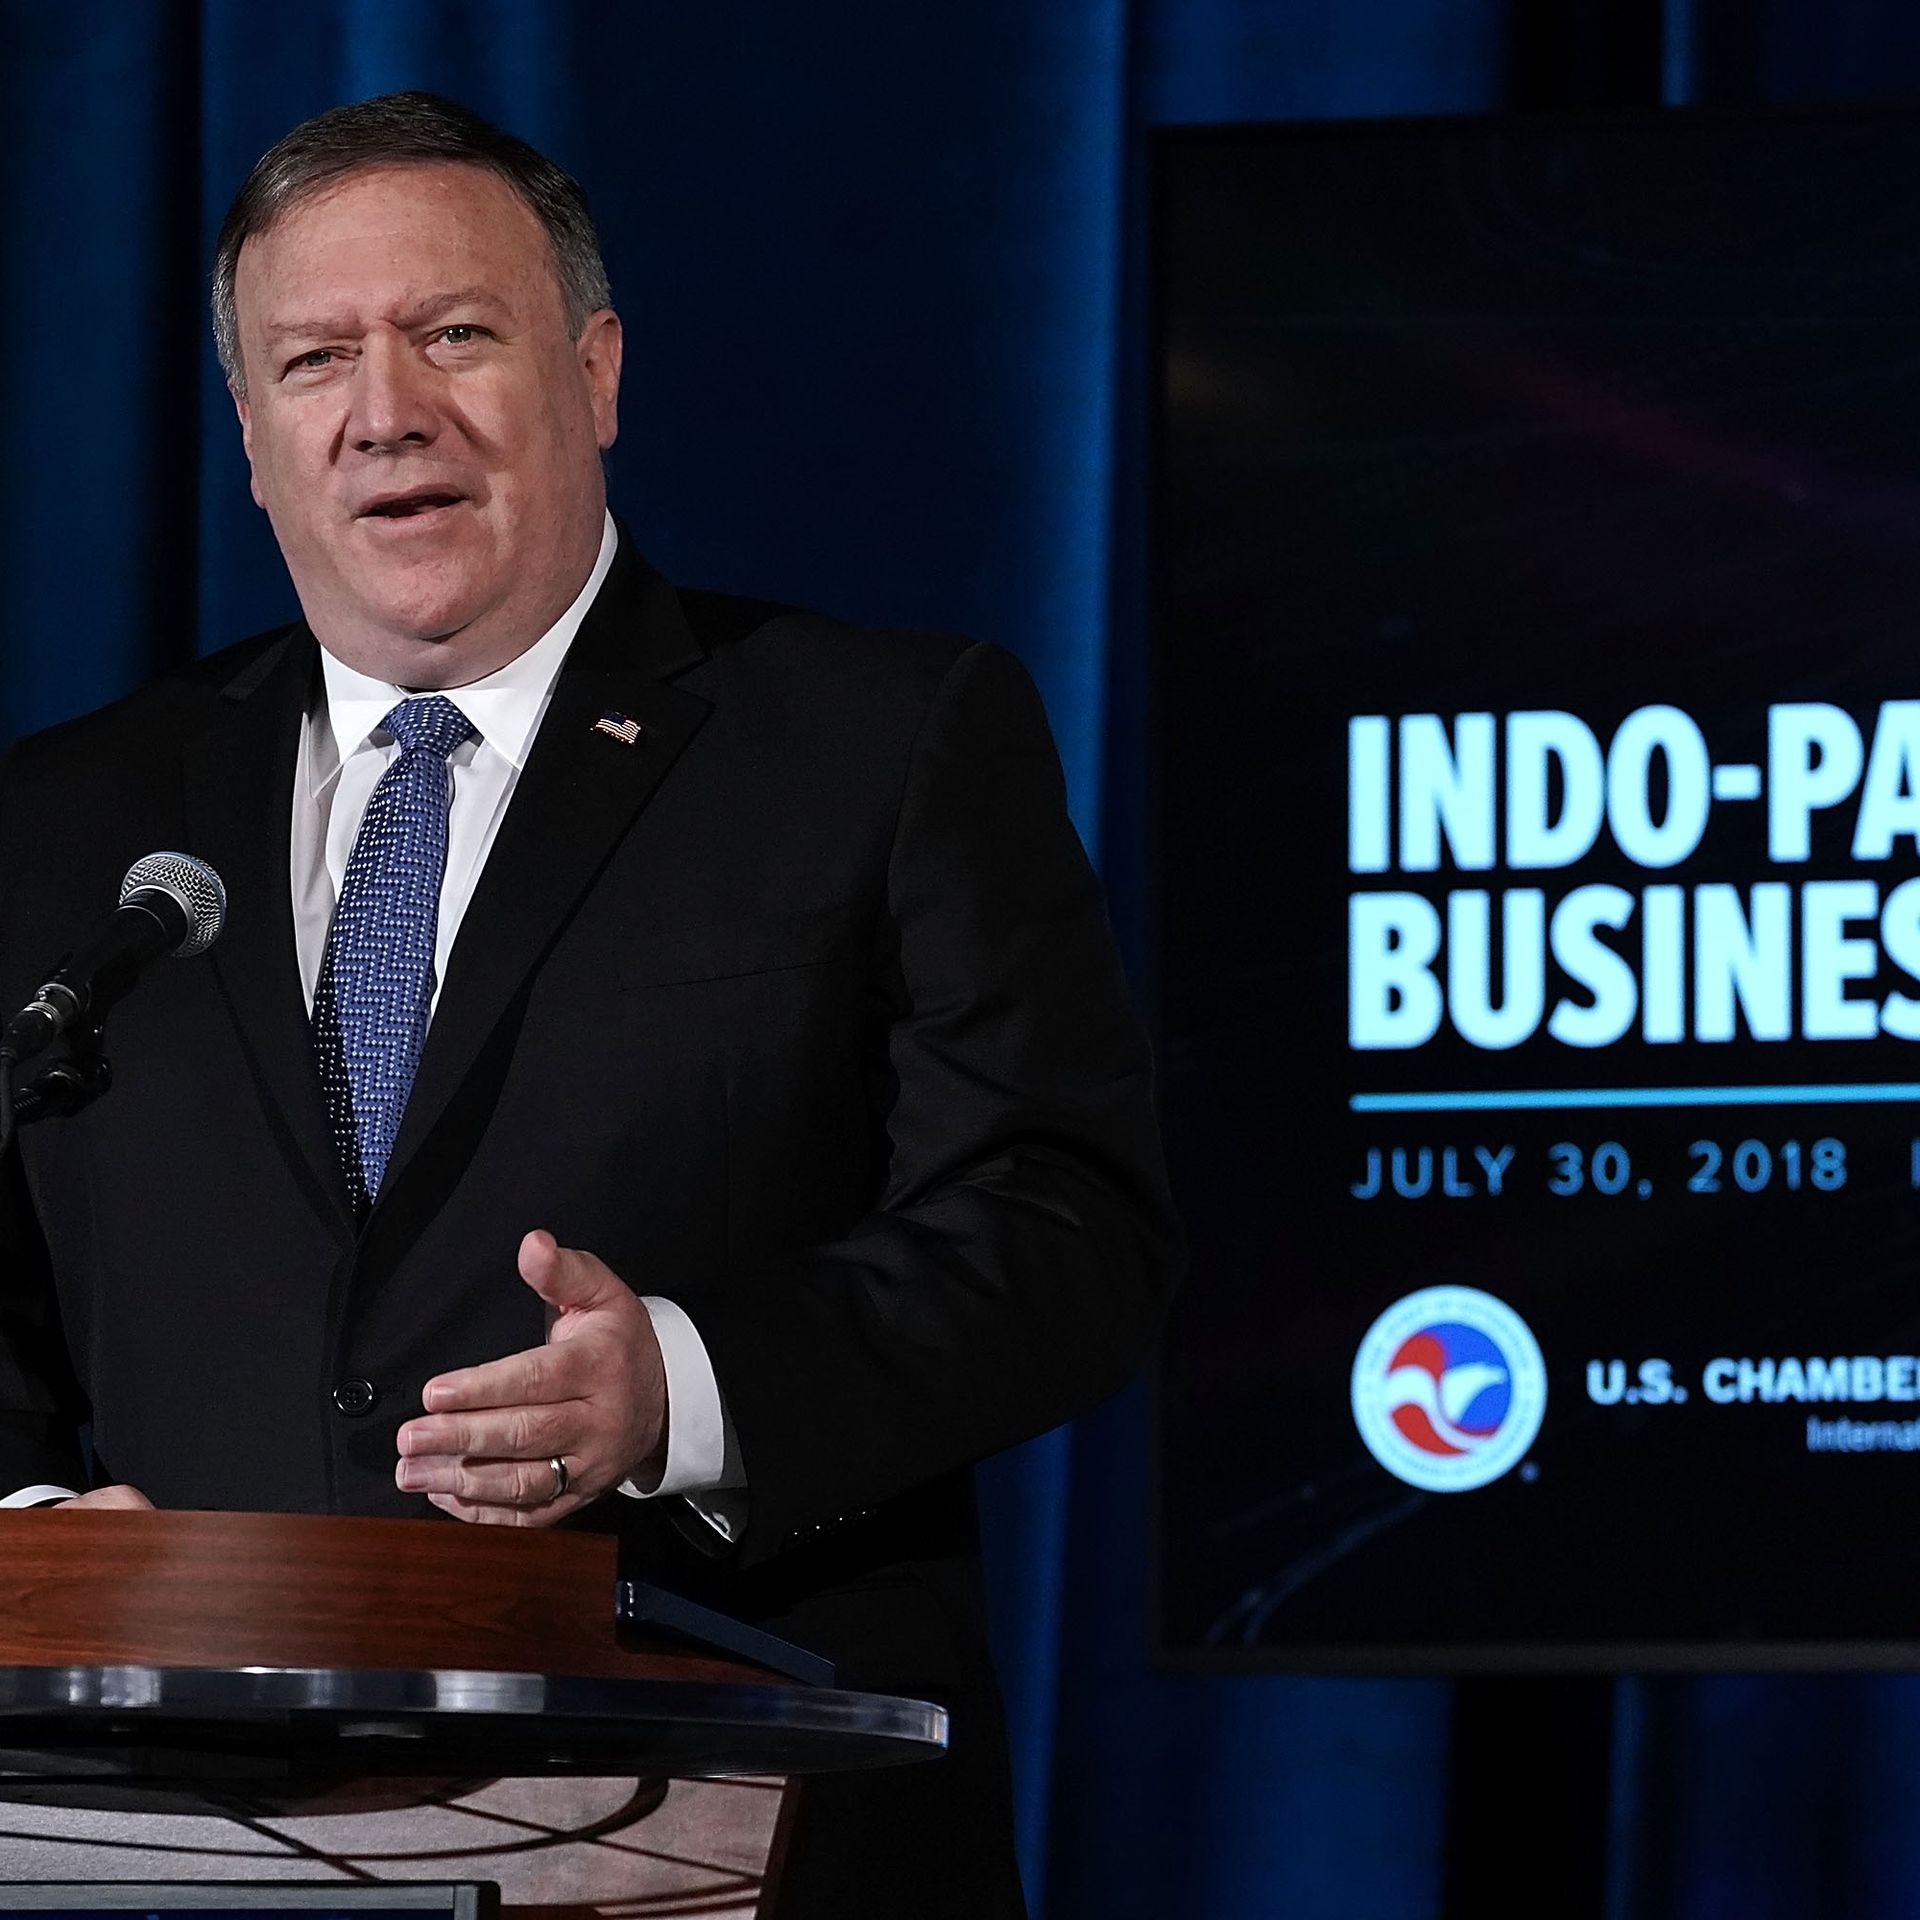 Secretary of State Pompeo speaks during the Indo-Pacific Business Forum at the U.S. Chamber of Commerce on July 30, 2018, in Washington, DC.